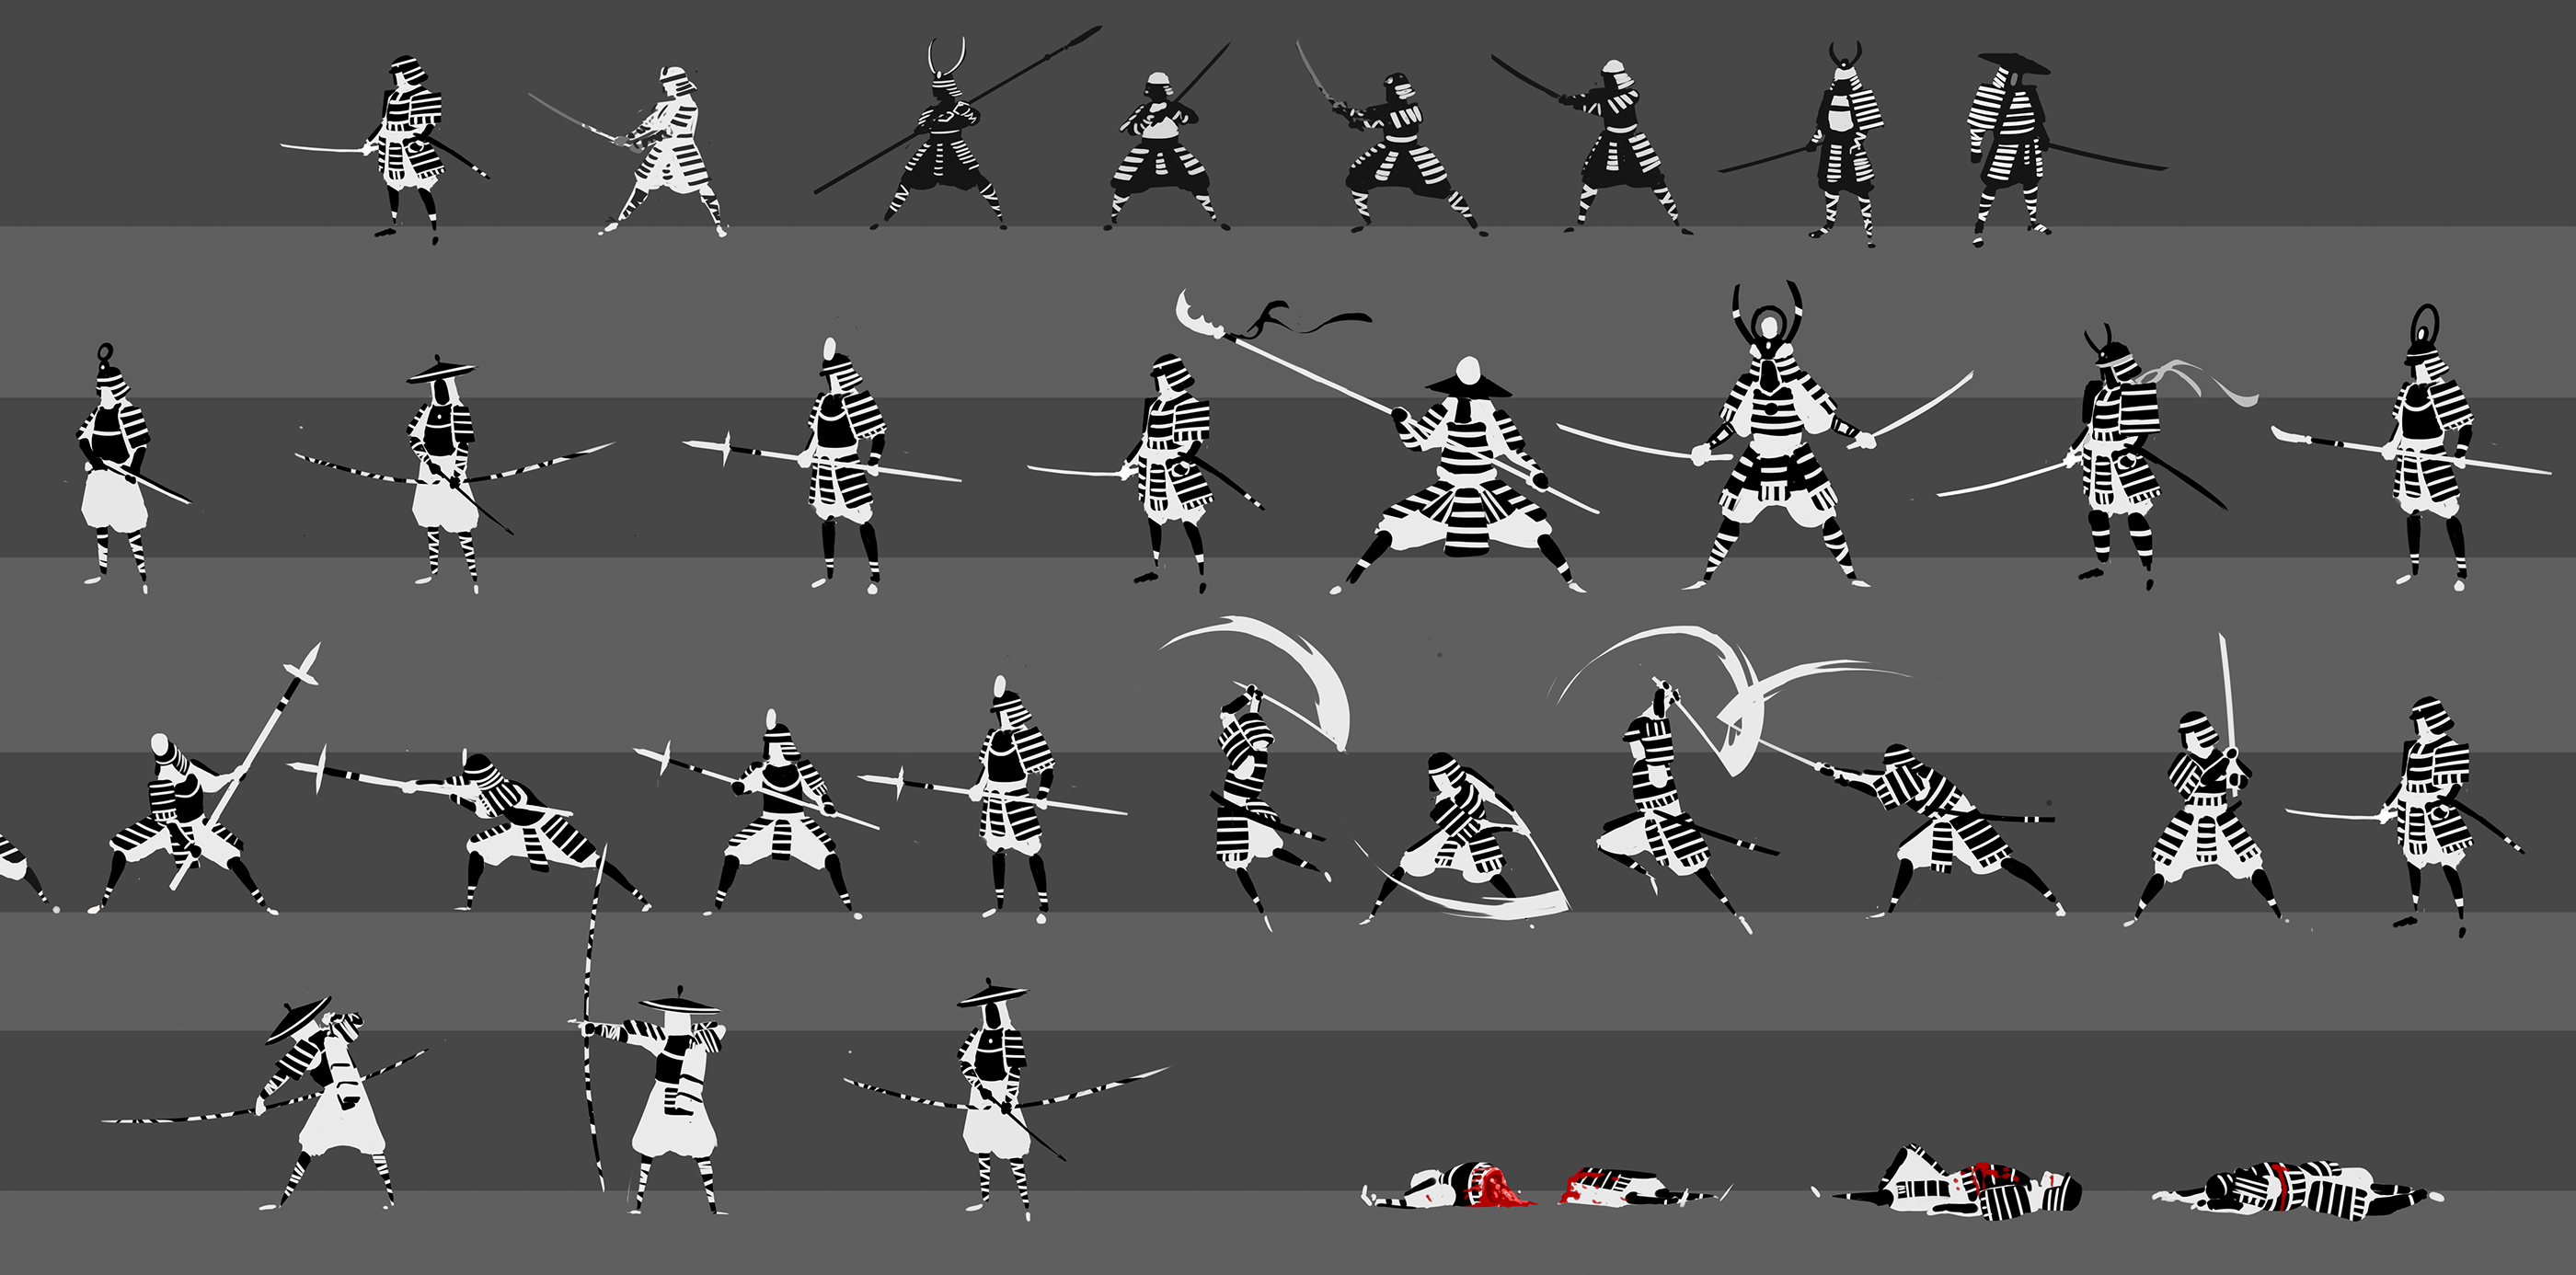 Visuals for a 2d platform game including concepts, character design, sprite...